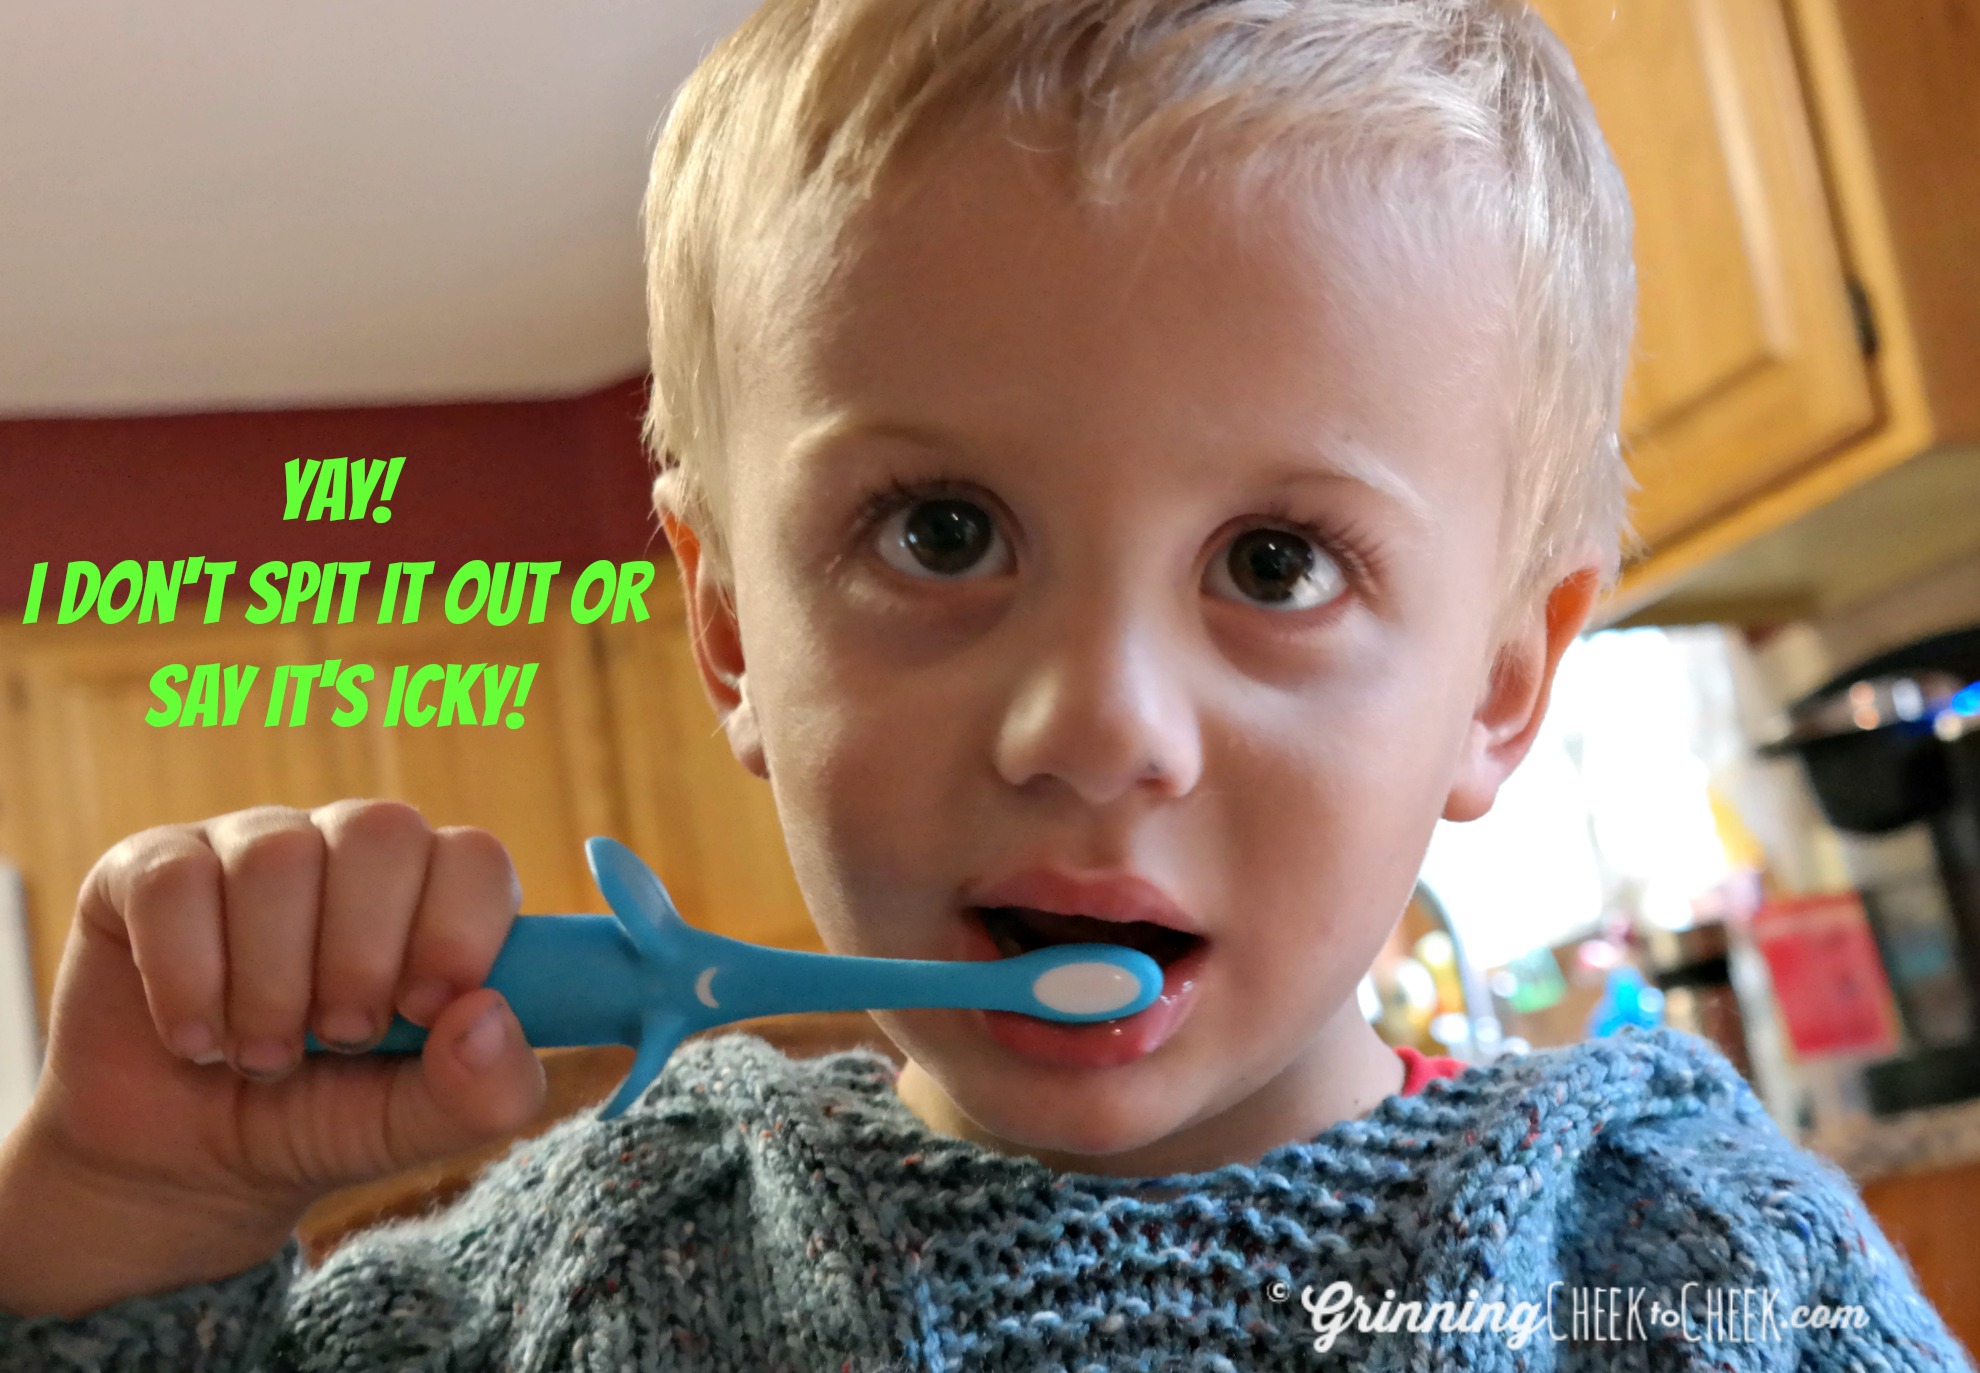 Make Toothbrushing a Little Easier with Dr. Brown’s!